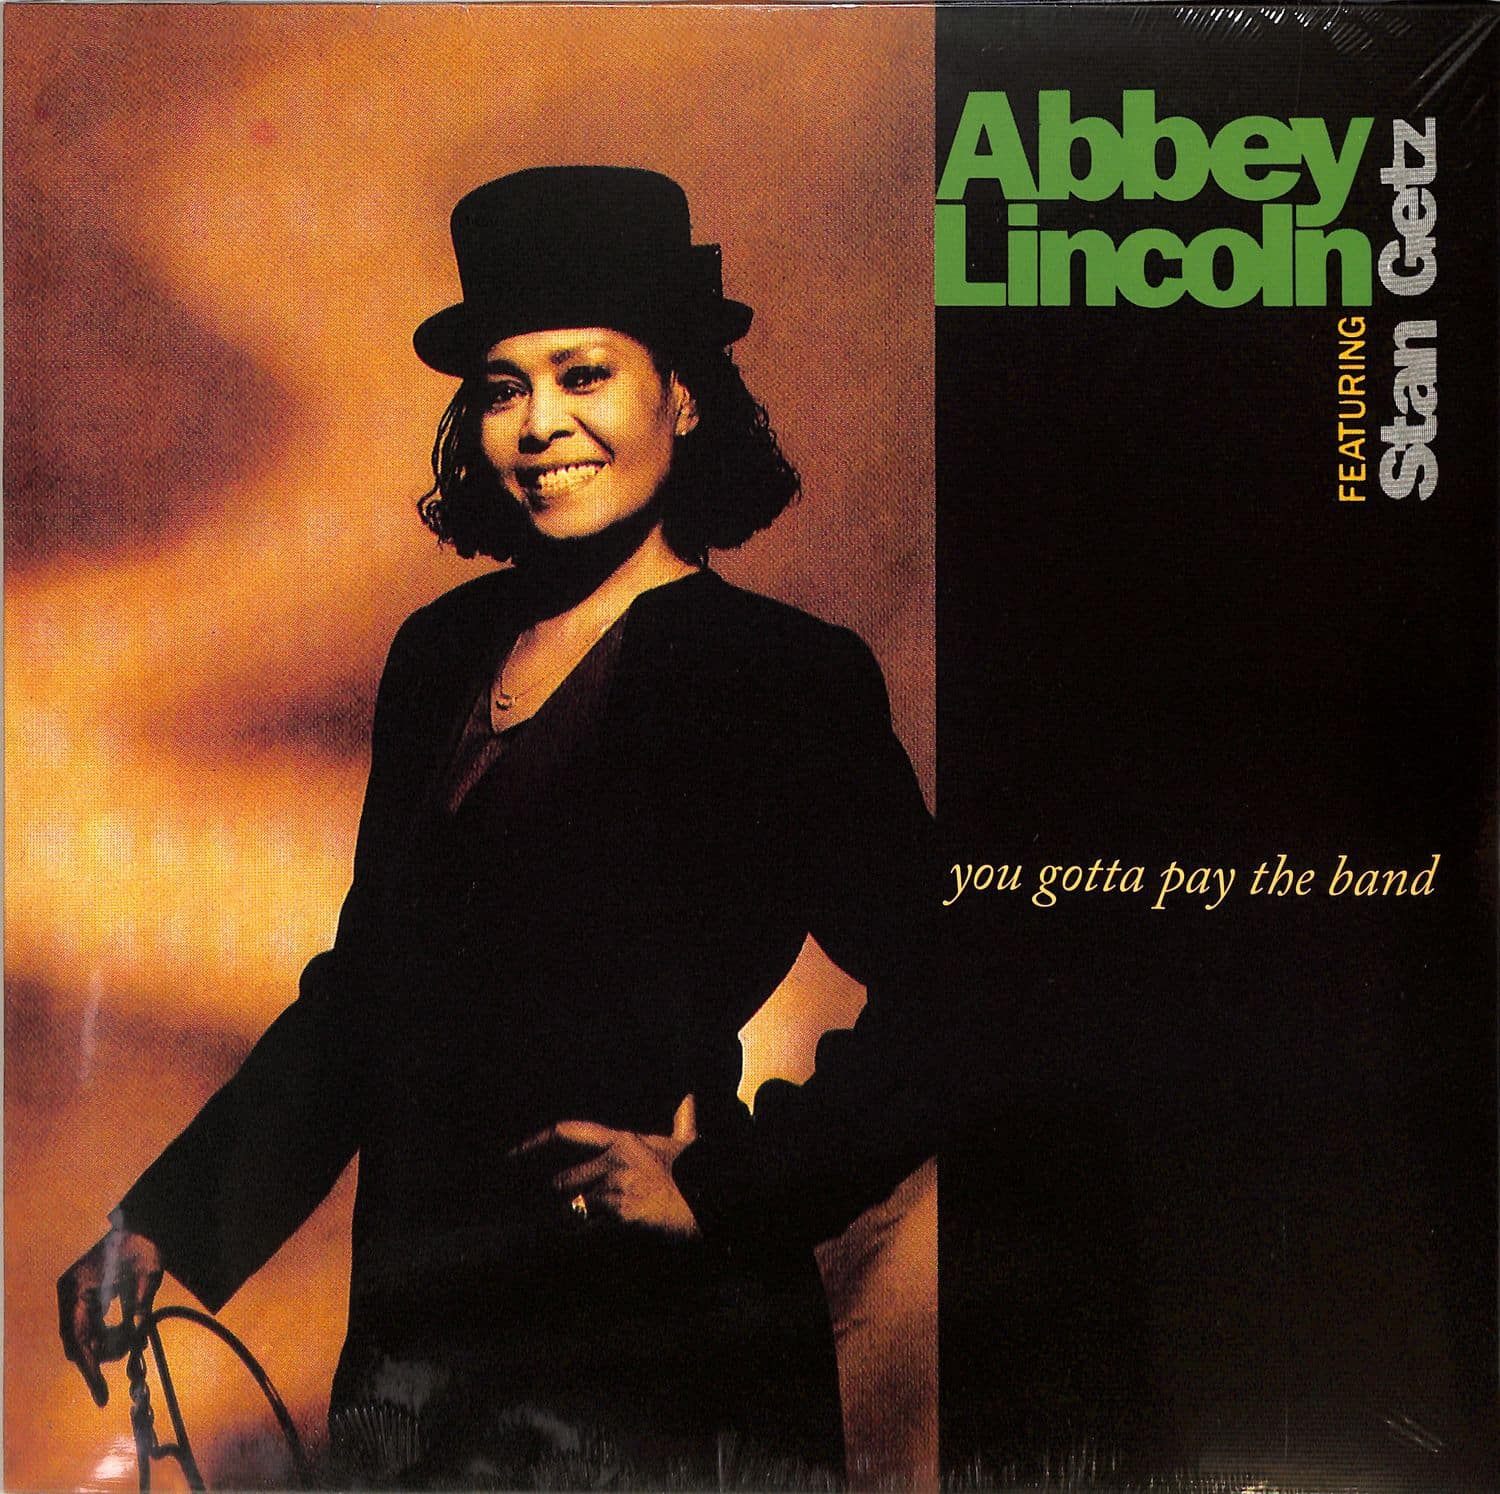 Abbey Lincoln & Stan Getz - YOU GOTTA PAY THE BAND 